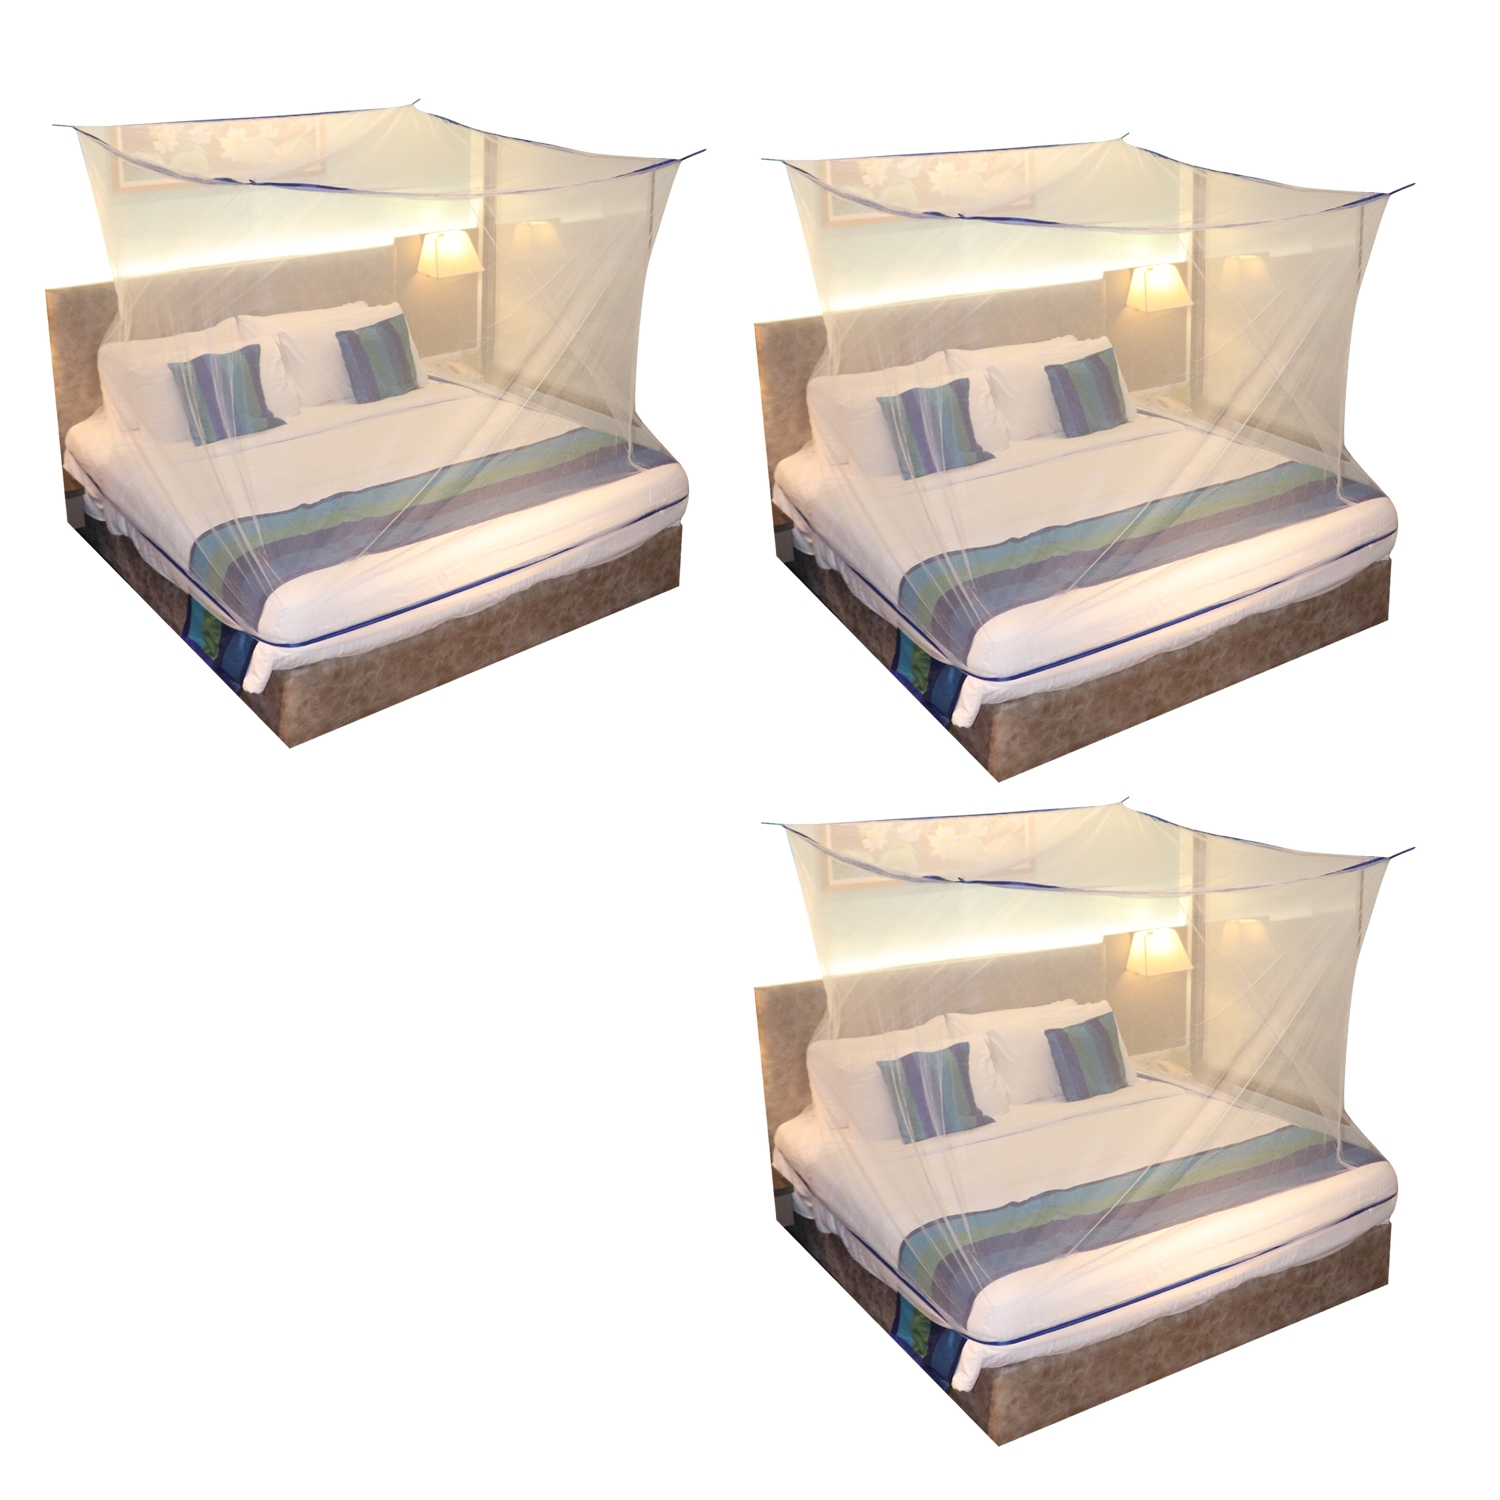 Mosquito Net for Double Bed, King-Size, Square Hanging Foldable Polyester Net White And BluePack of 3